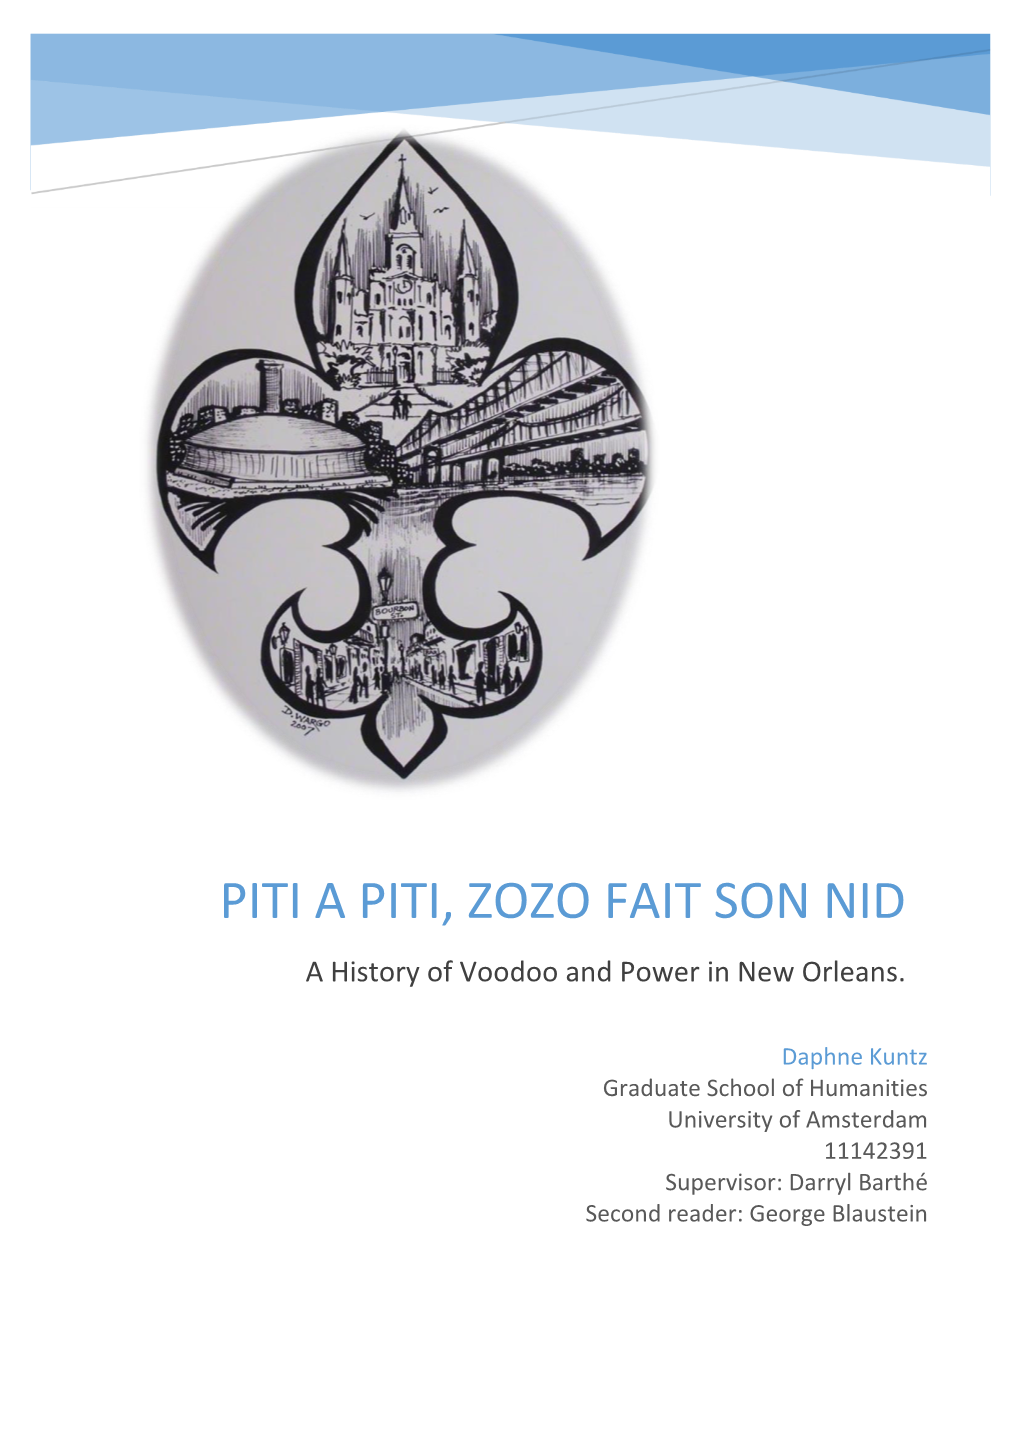 PITI a PITI, ZOZO FAIT SON NID a History of Voodoo and Power in New Orleans